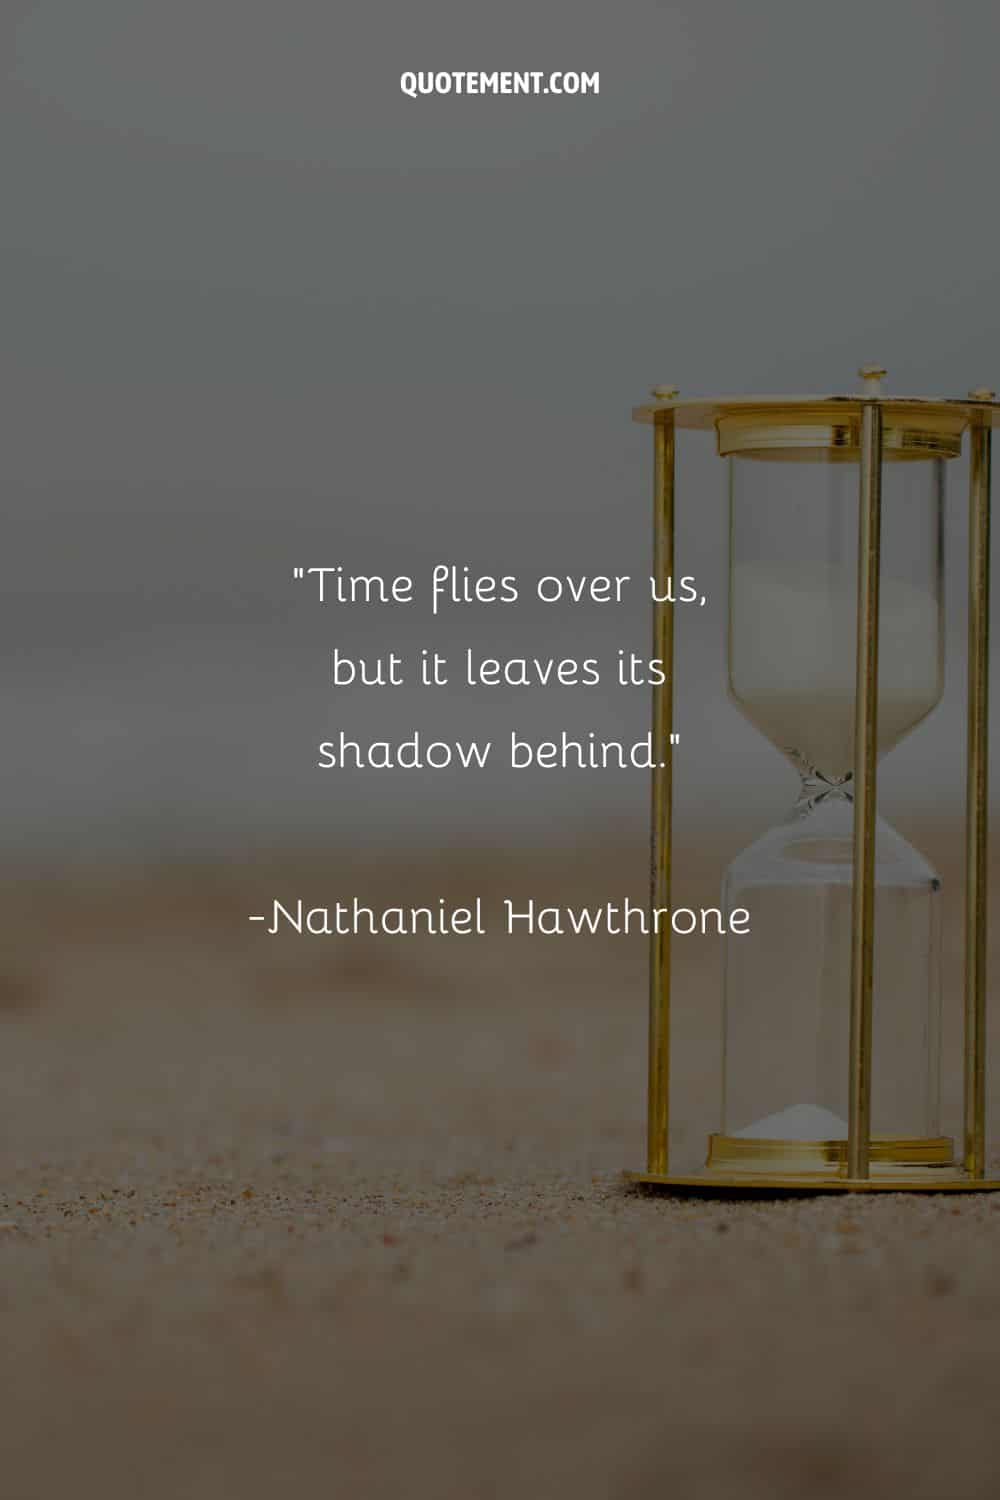 a golden hourglass sand timer representing thought-provoking time flies by so fast quote
